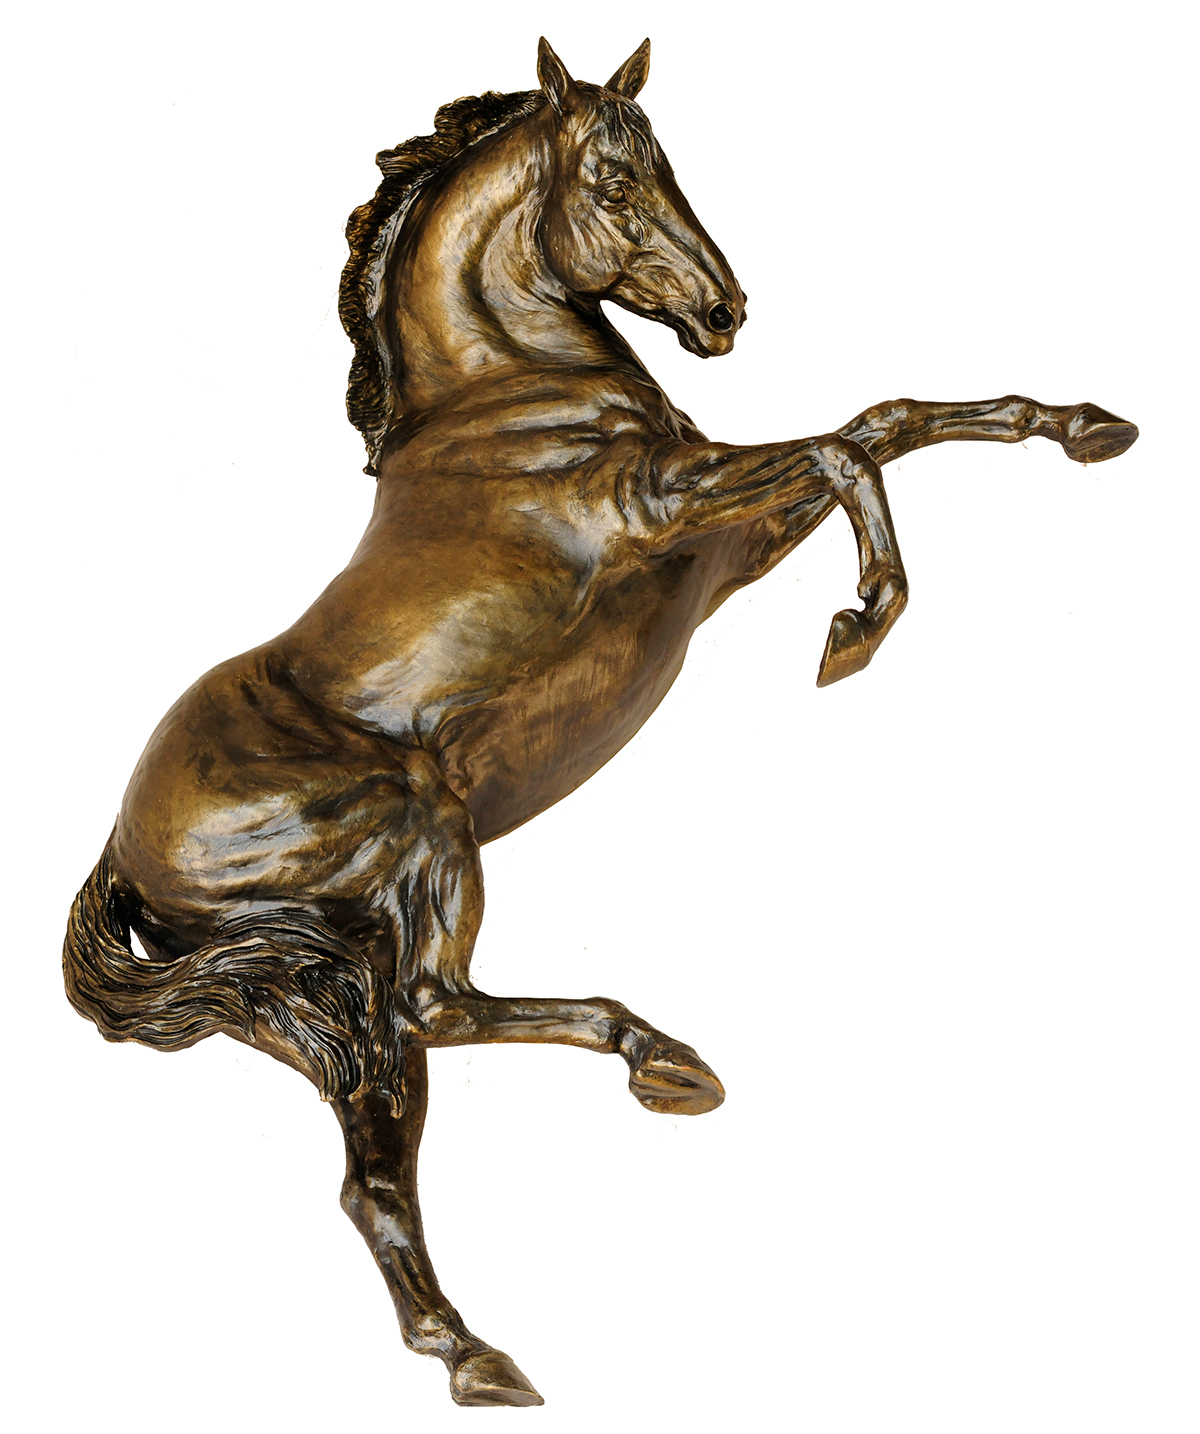 Retail product photo image sculpture Fragrance beauty horse equine scent